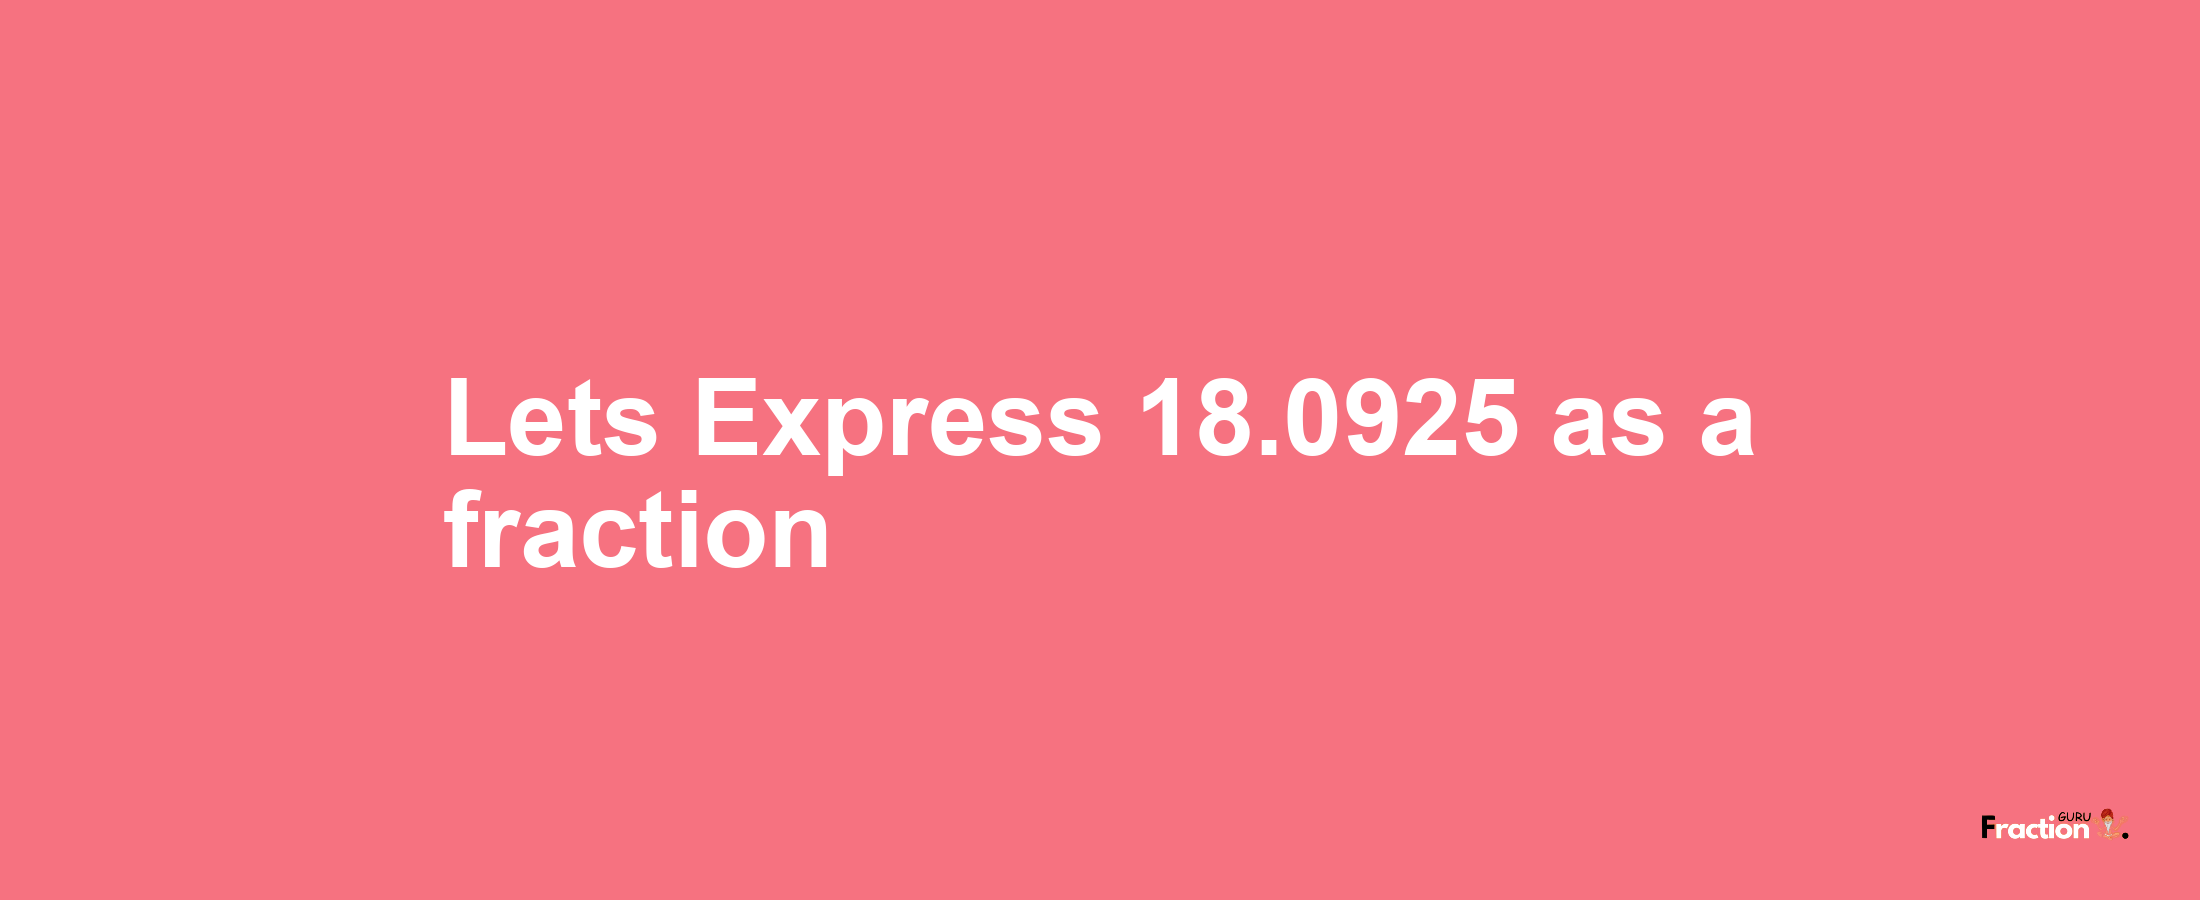 Lets Express 18.0925 as afraction